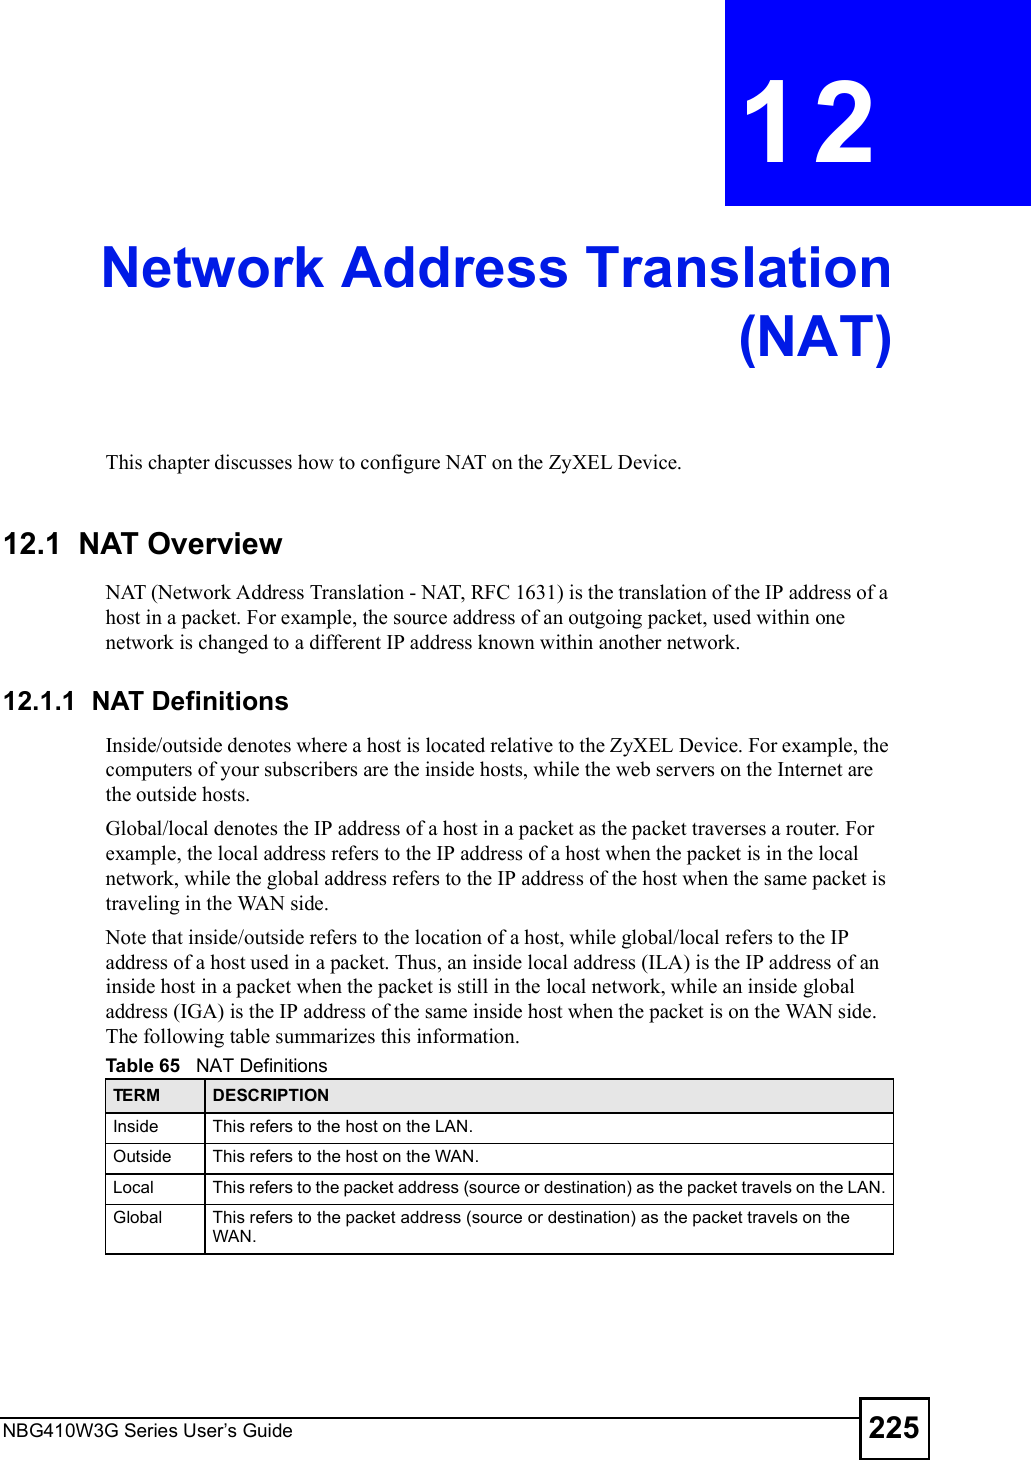 NBG410W3G Series User s Guide 225CHAPTER  12 Network Address Translation(NAT)This chapter discusses how to configure NAT on the ZyXEL Device.12.1  NAT Overview   NAT (Network Address Translation - NAT, RFC 1631) is the translation of the IP address of a host in a packet. For example, the source address of an outgoing packet, used within one network is changed to a different IP address known within another network. 12.1.1  NAT DefinitionsInside/outside denotes where a host is located relative to the ZyXEL Device. For example, the computers of your subscribers are the inside hosts, while the web servers on the Internet are the outside hosts. Global/local denotes the IP address of a host in a packet as the packet traverses a router. For example, the local address refers to the IP address of a host when the packet is in the local network, while the global address refers to the IP address of the host when the same packet is traveling in the WAN side. Note that inside/outside refers to the location of a host, while global/local refers to the IP address of a host used in a packet. Thus, an inside local address (ILA) is the IP address of an inside host in a packet when the packet is still in the local network, while an inside global address (IGA) is the IP address of the same inside host when the packet is on the WAN side. The following table summarizes this information.Table 65   NAT DefinitionsTERM DESCRIPTIONInside This refers to the host on the LAN.Outside This refers to the host on the WAN.Local This refers to the packet address (source or destination) as the packet travels on the LAN.Global This refers to the packet address (source or destination) as the packet travels on the WAN.